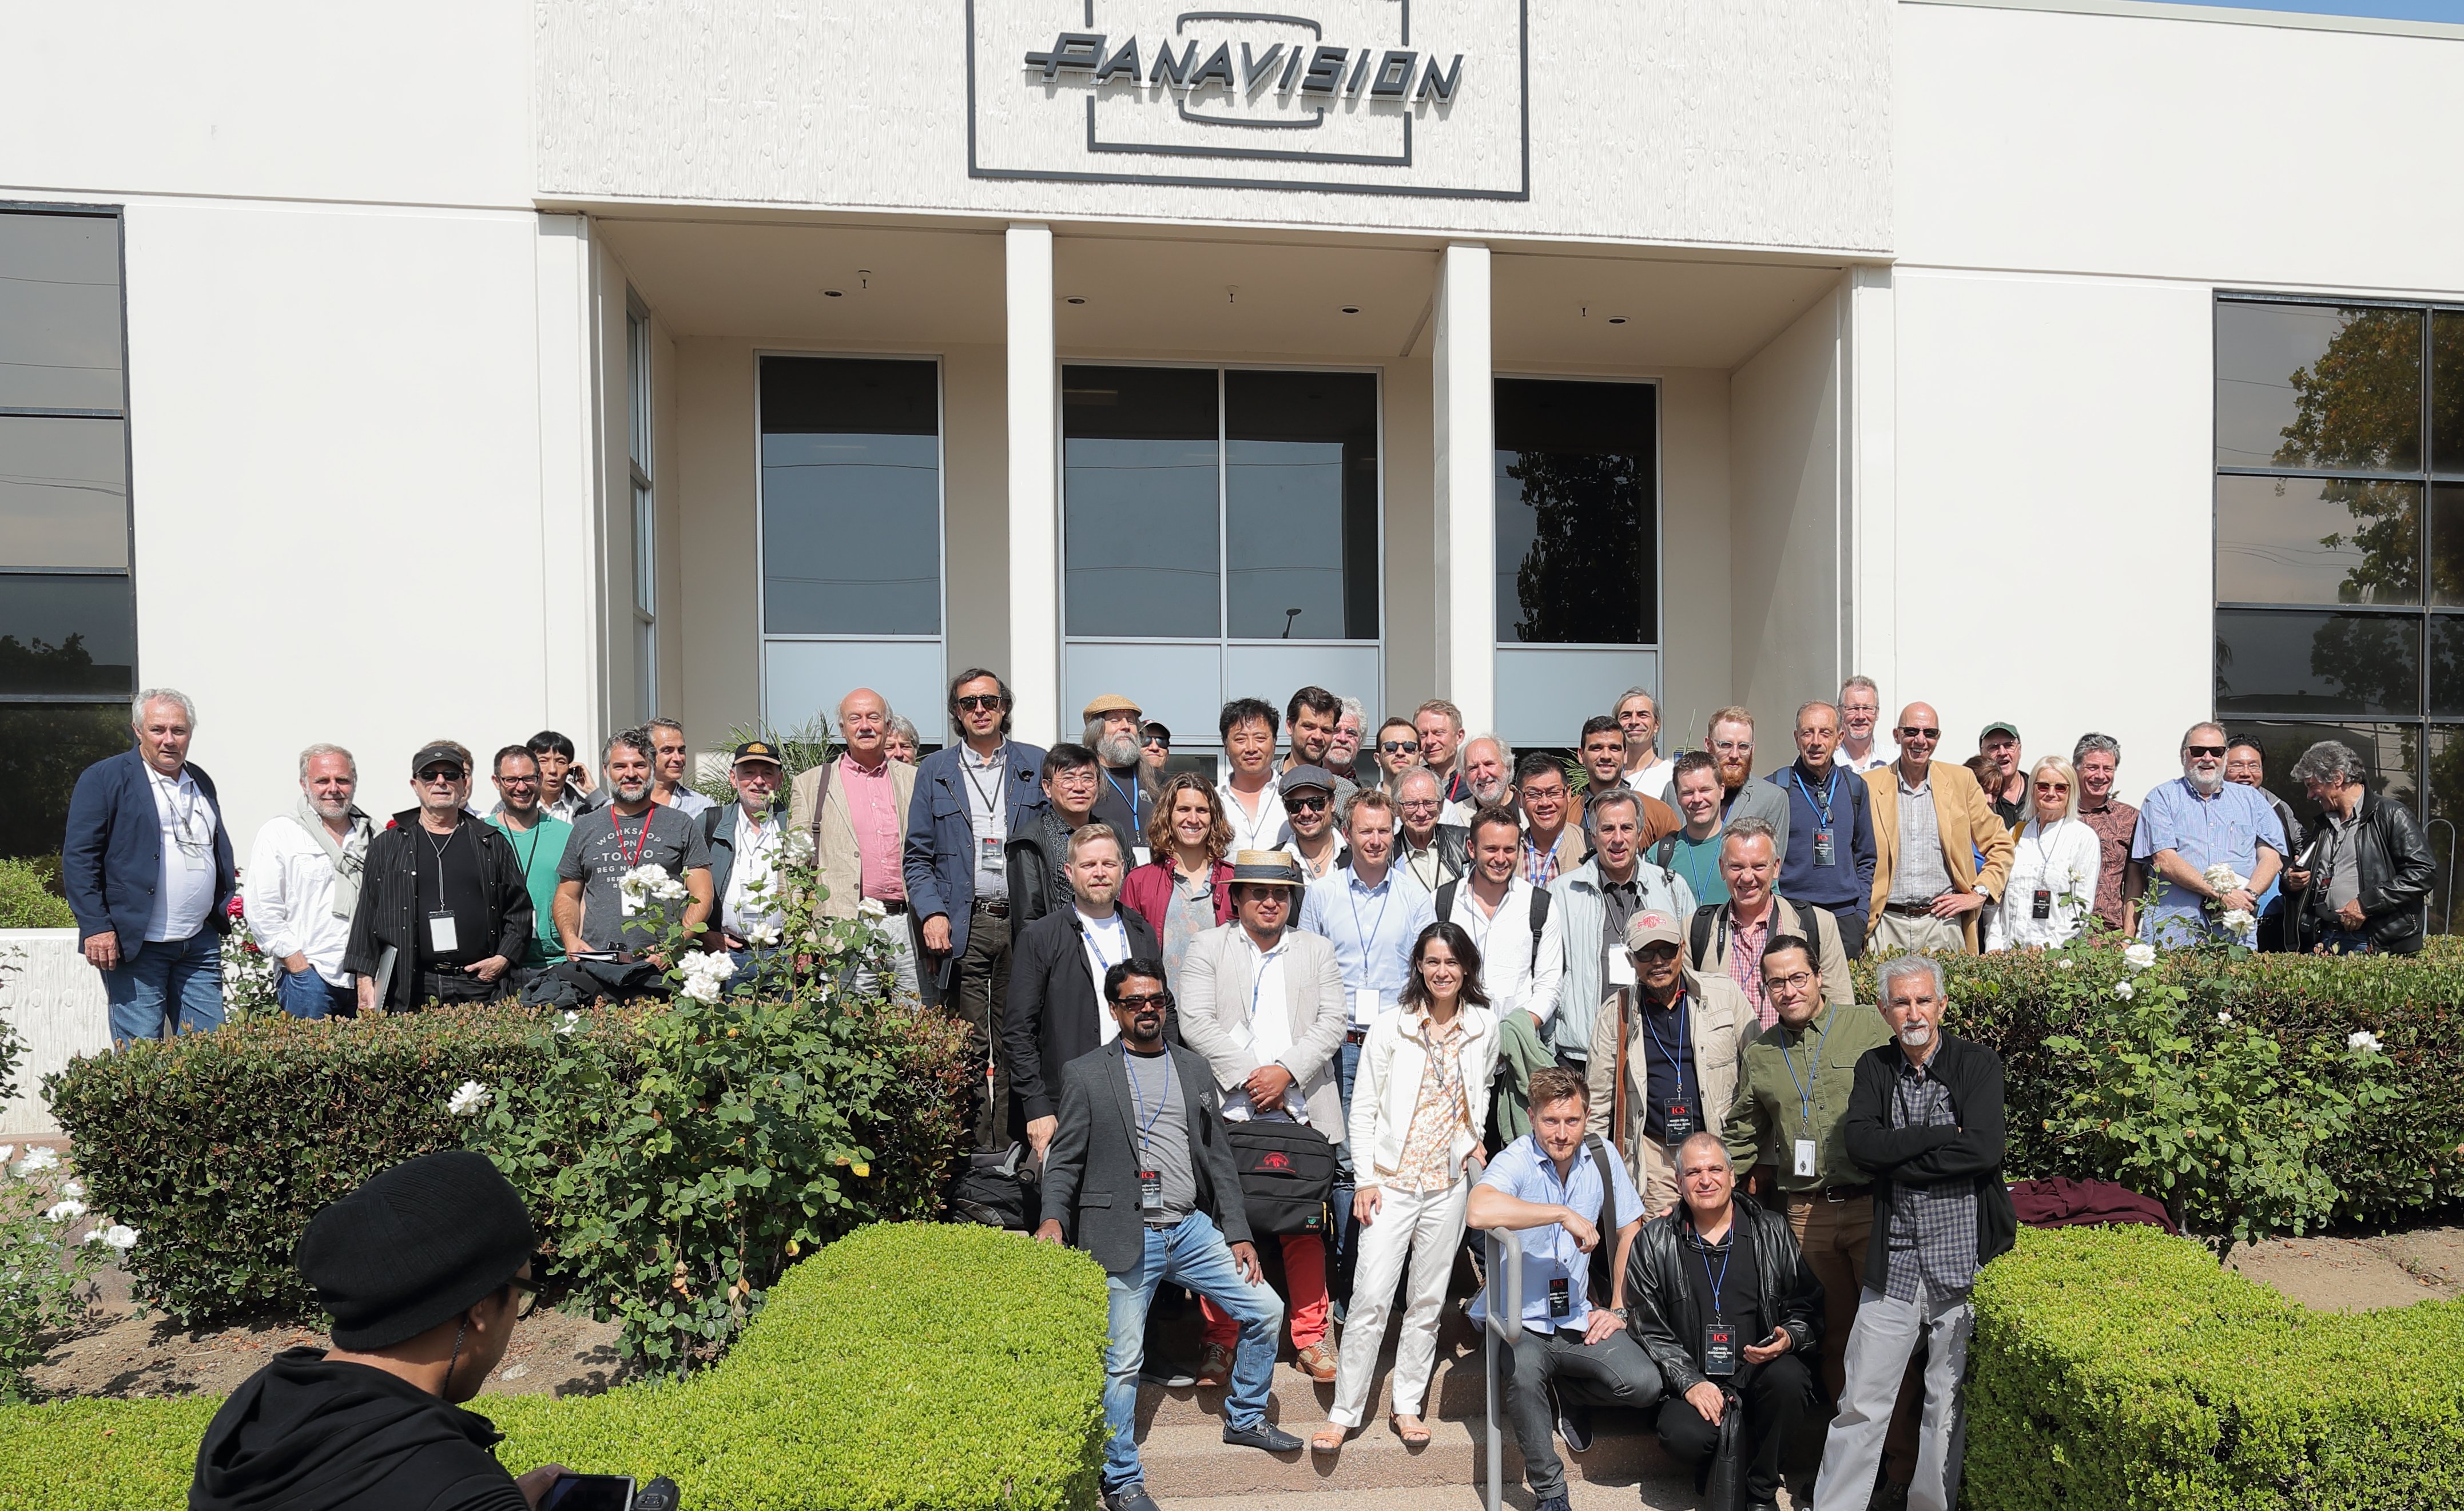 ICS participants arrive at Panavision for a presentation on formats and optics. Photo by James Neihouse, ASC